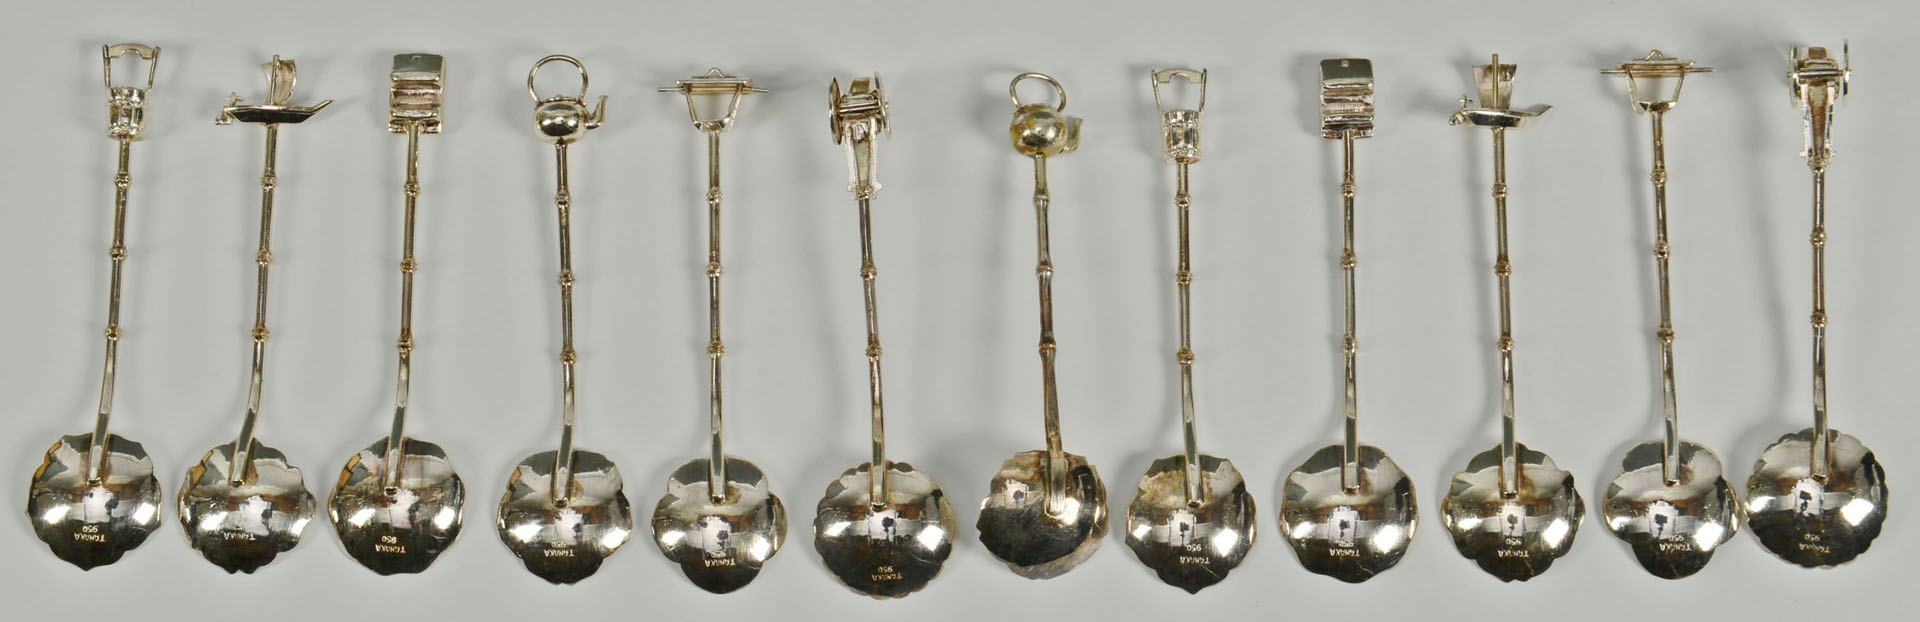 Lot 731: Set of 12 Japanese .950 Silver Novelty Spoons